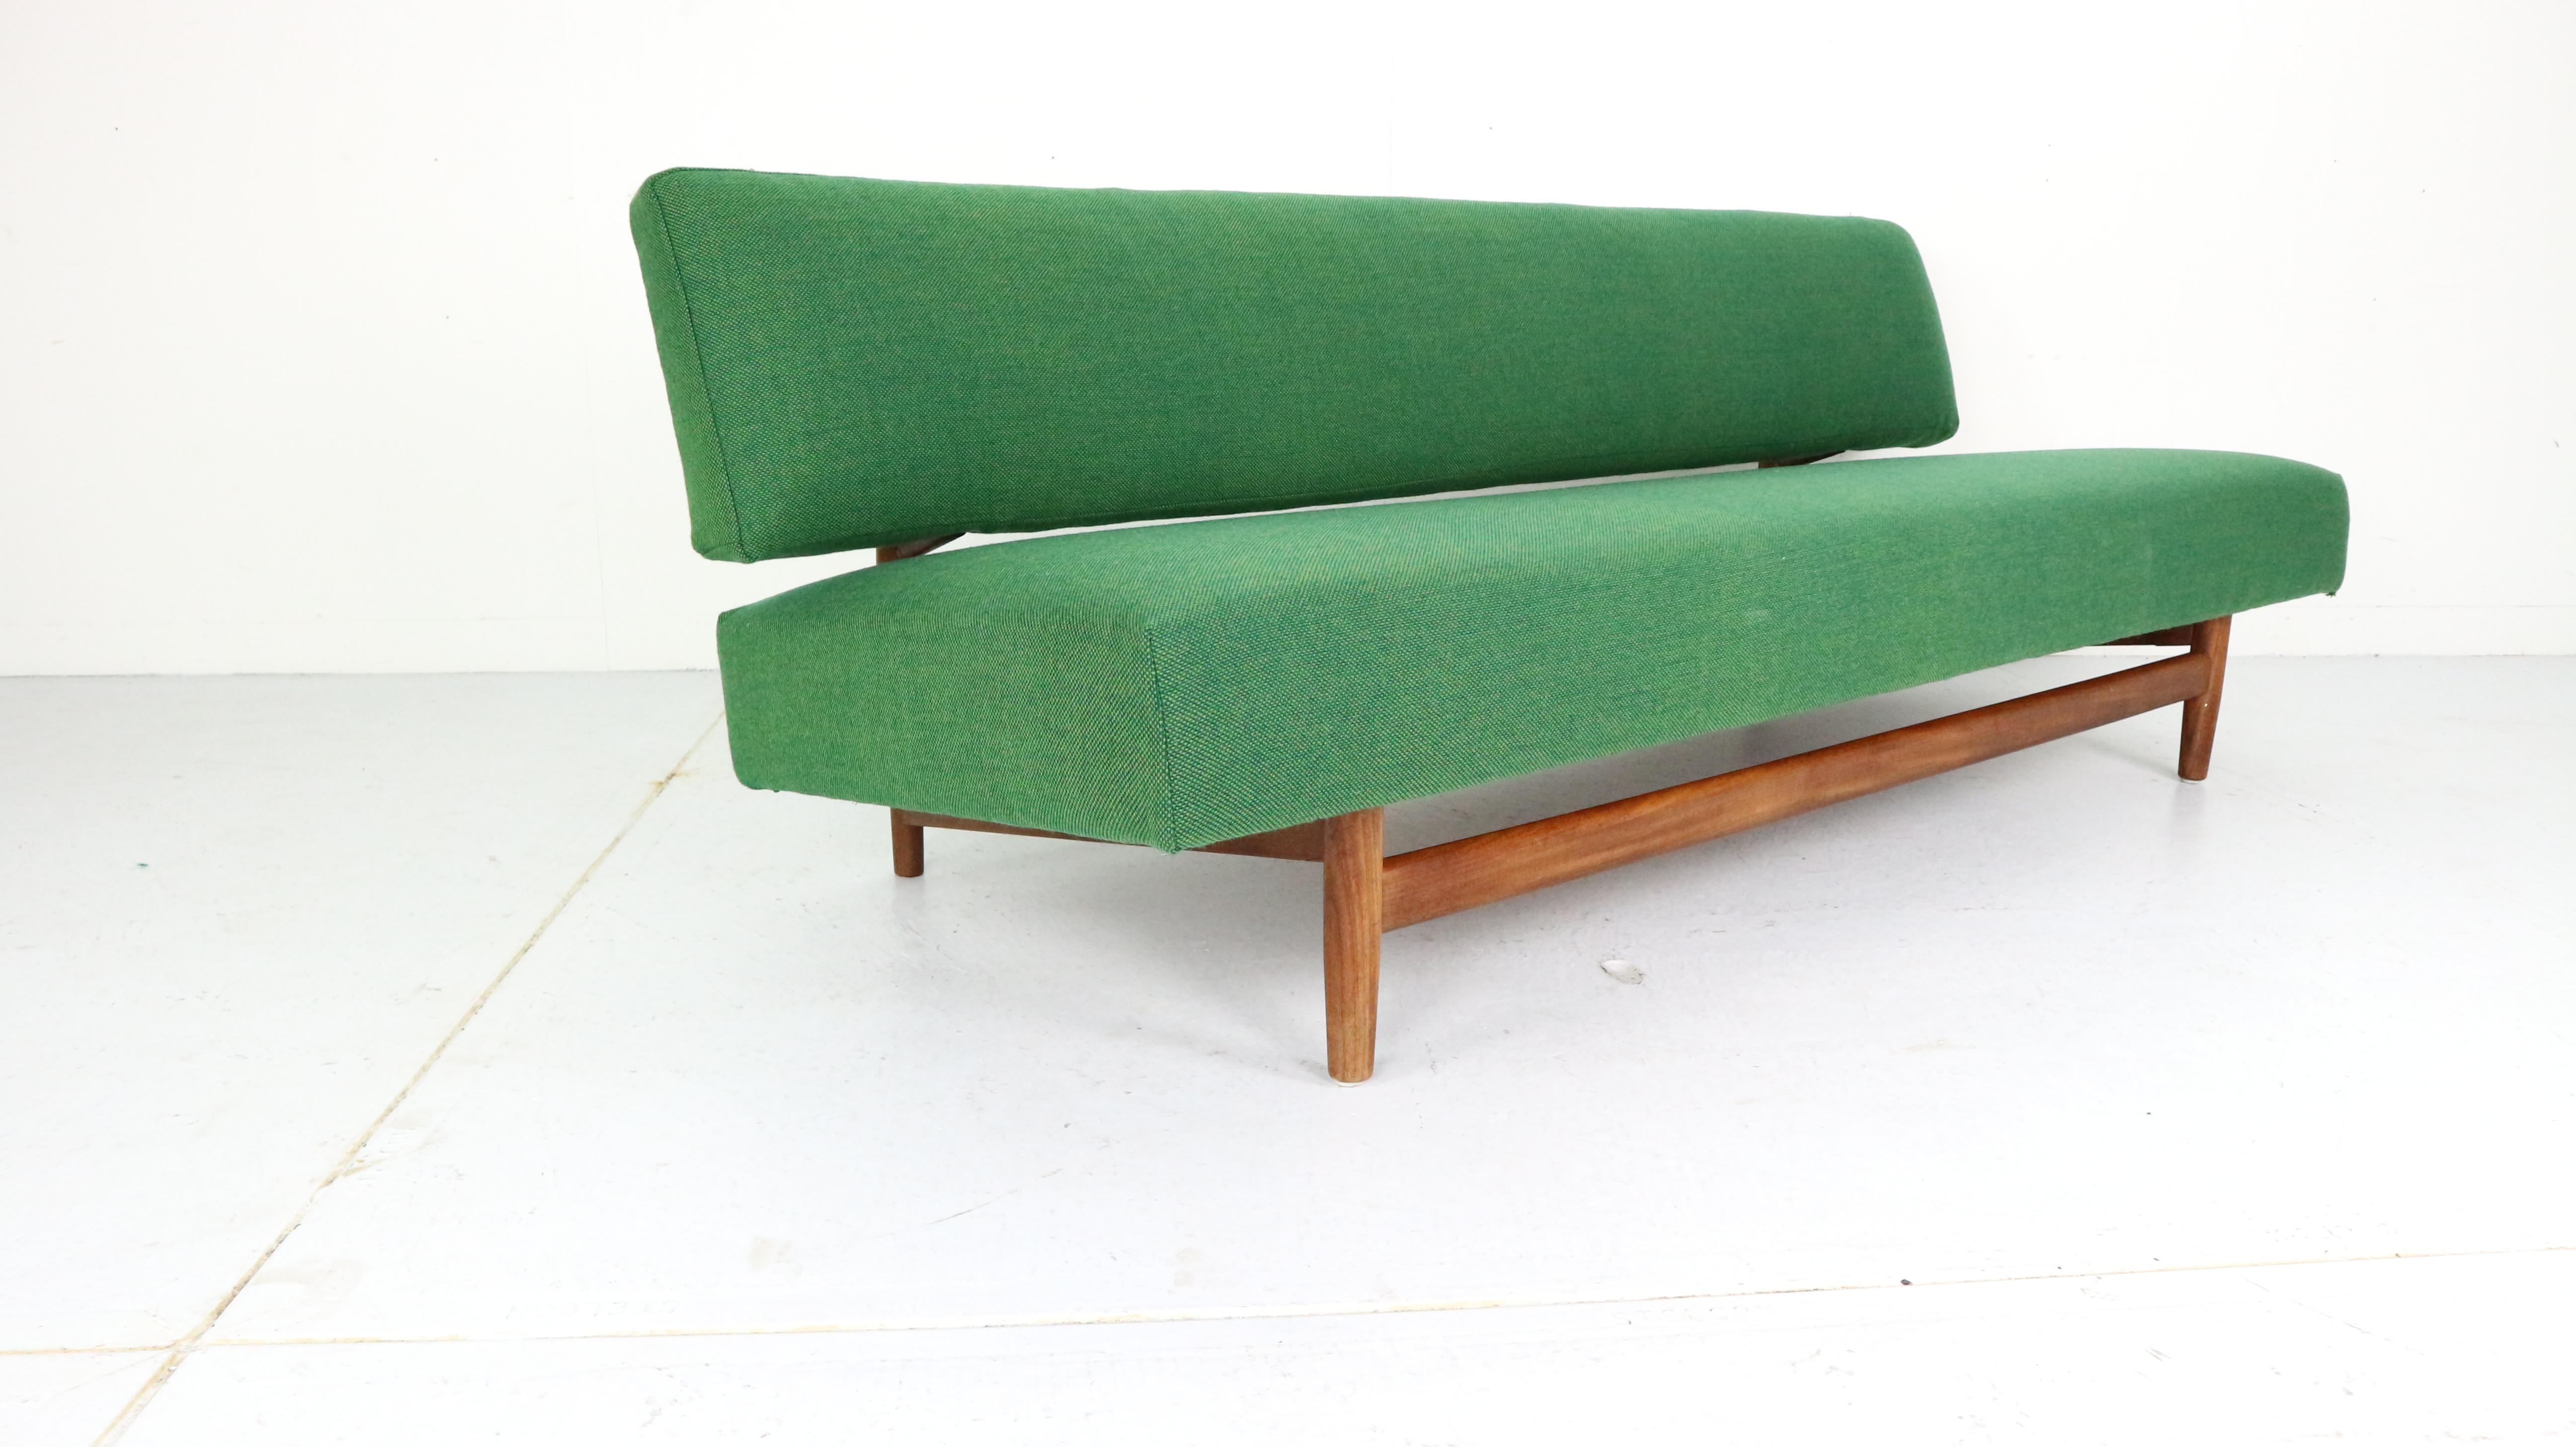 This beautiful sofa designed by Rob Parry for Gelderland, 1950s.
Minimalistic and elegant Dutch design pride.
With one movement, the seat can be pulled out into a single sofa bed or daybed.
Measurements: 70cm.
This sofa bed has a teak elegant